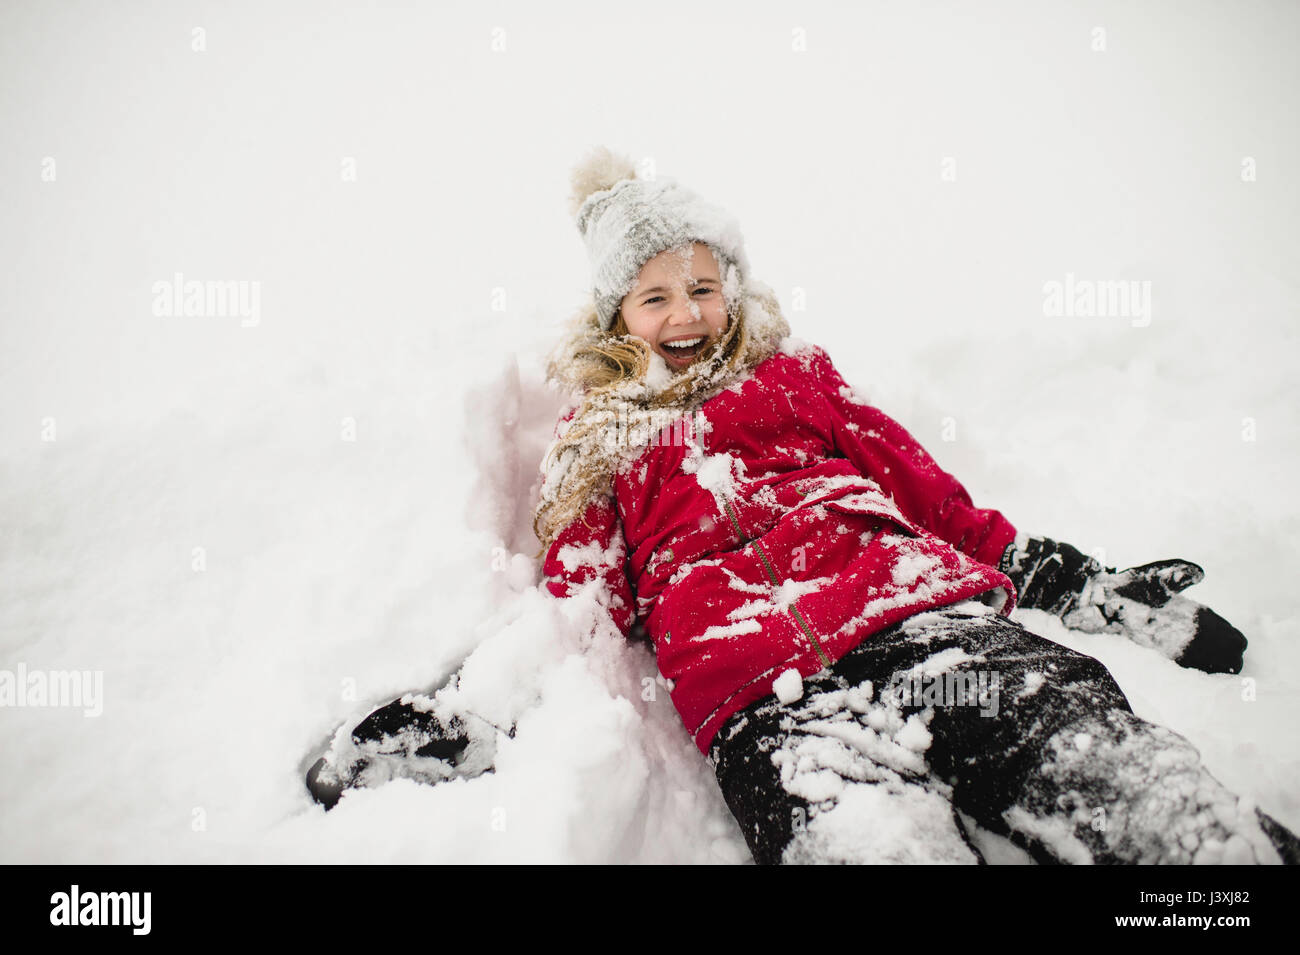 Smiling girl lying on back and covered in snow Stock Photo